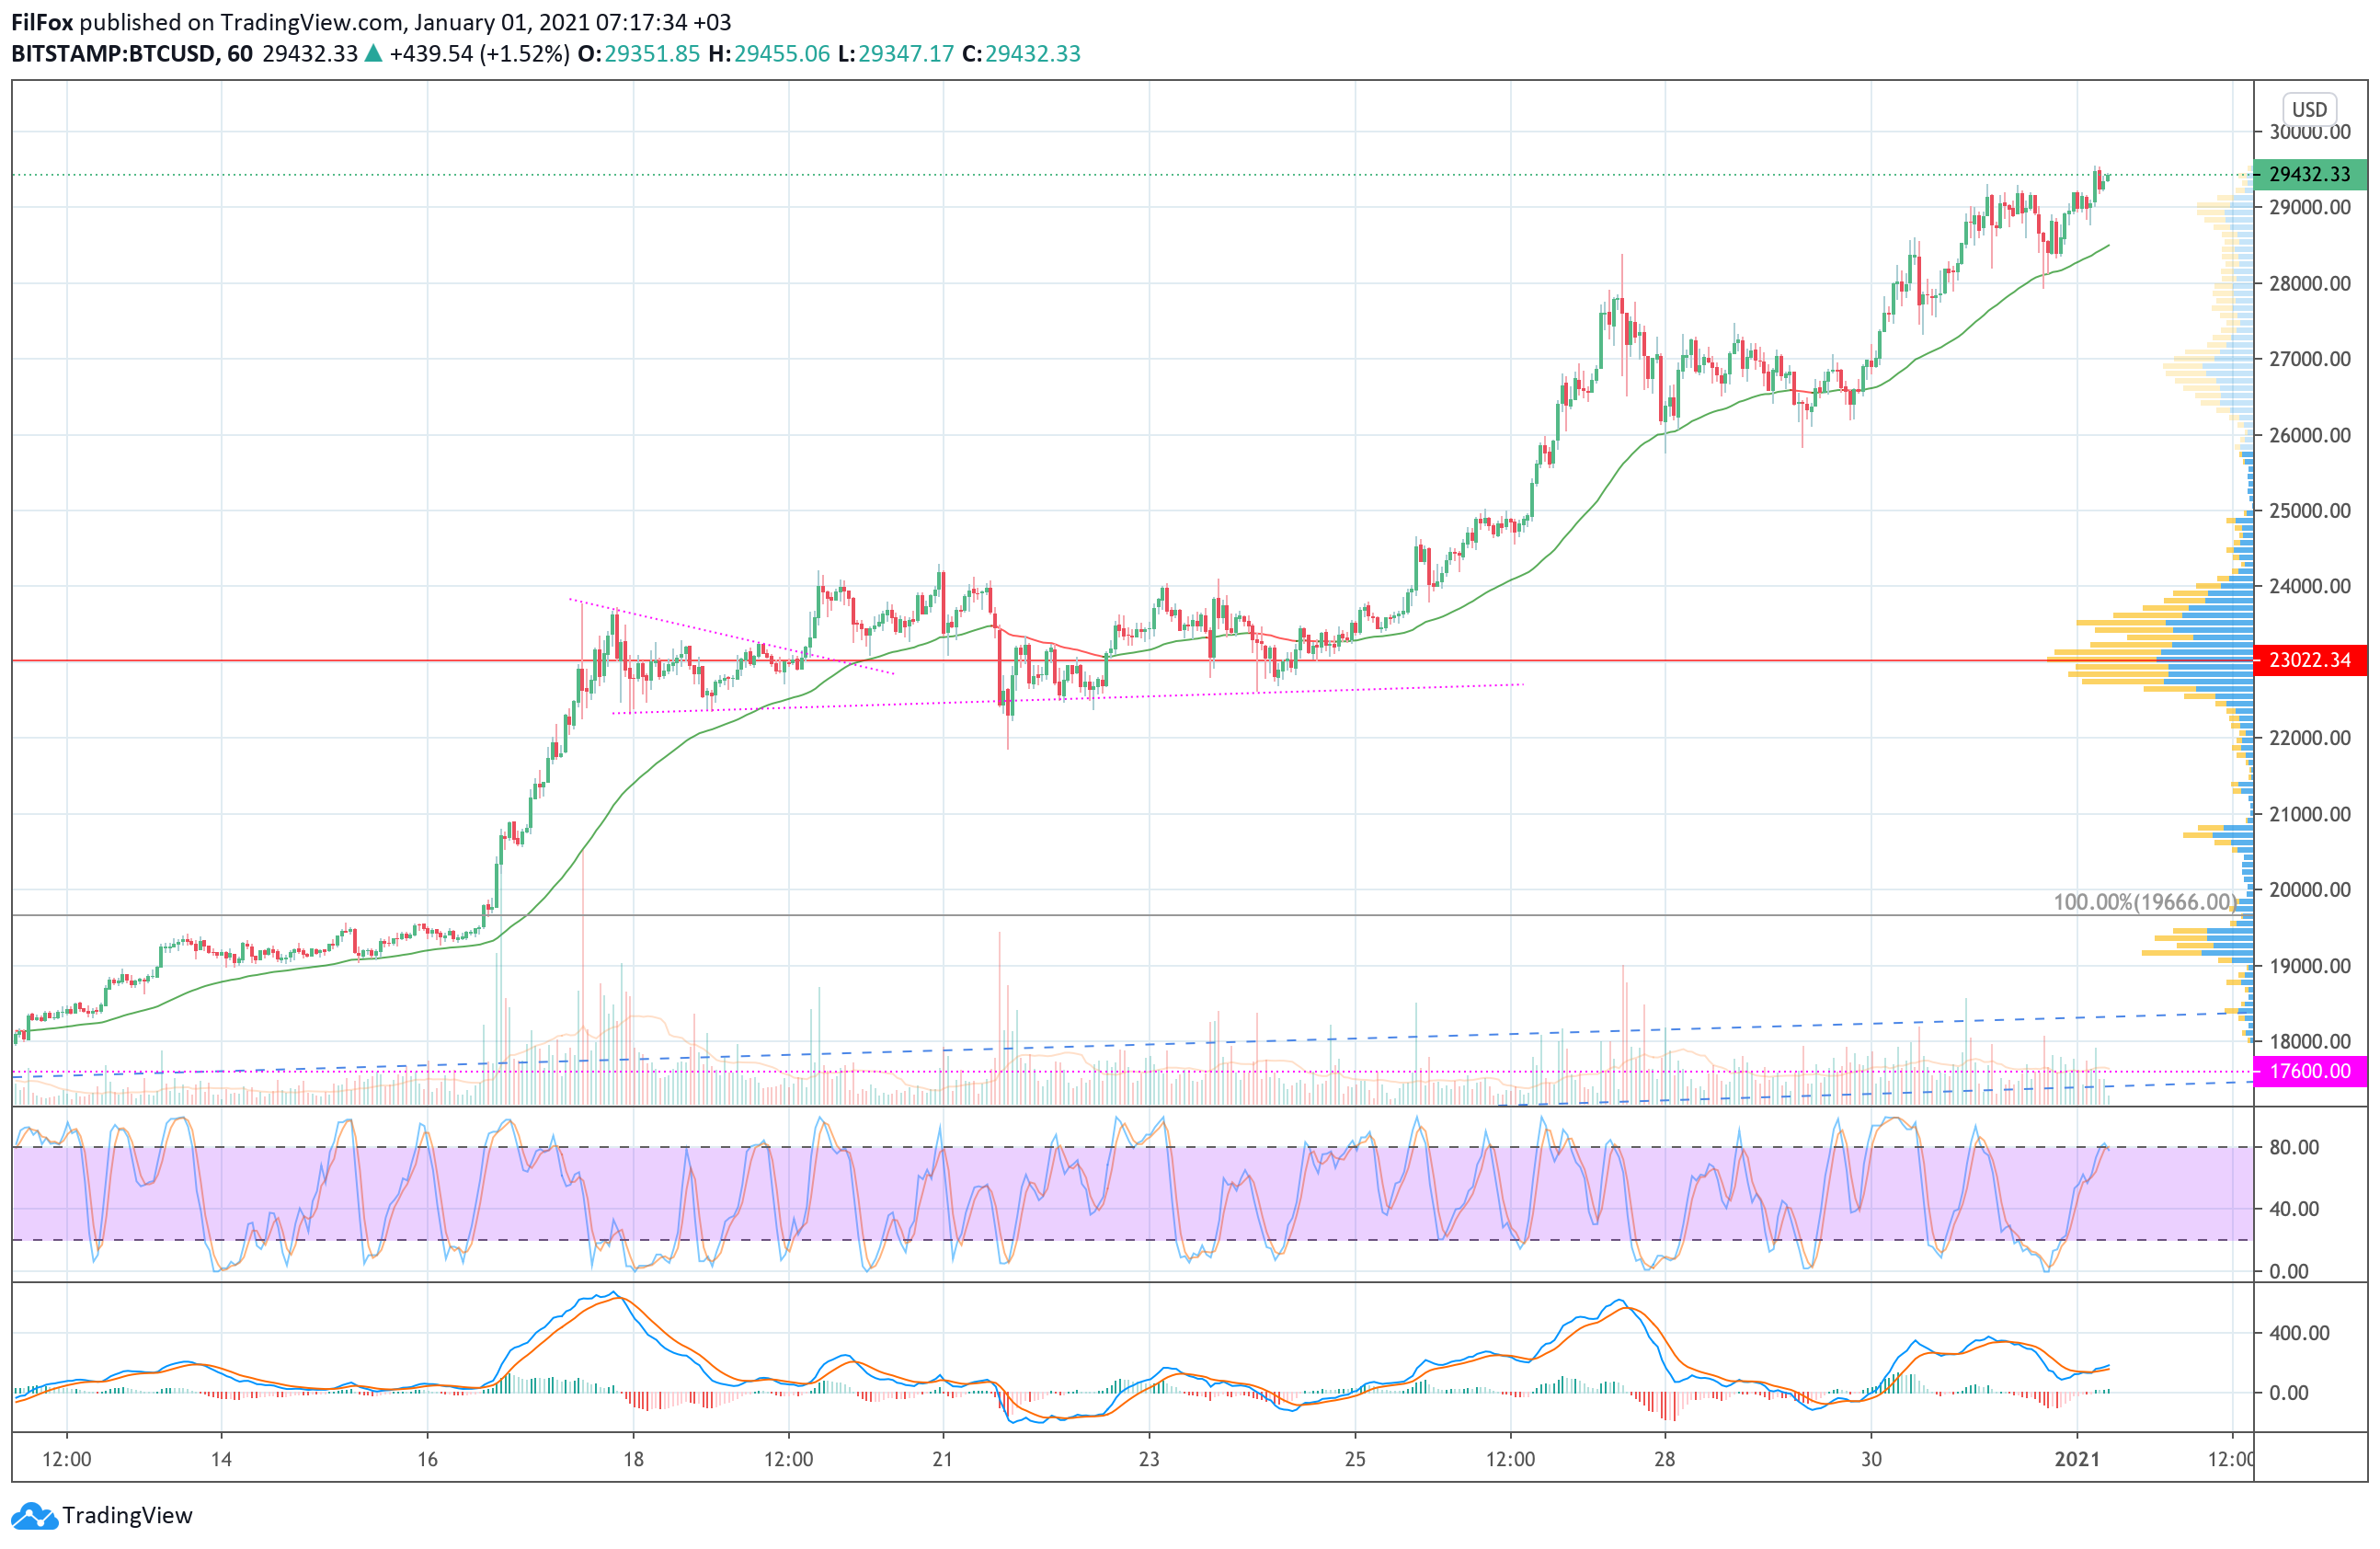 Analysis of prices for Bitcoin, Ethereum, Ripple for 01.01.2021